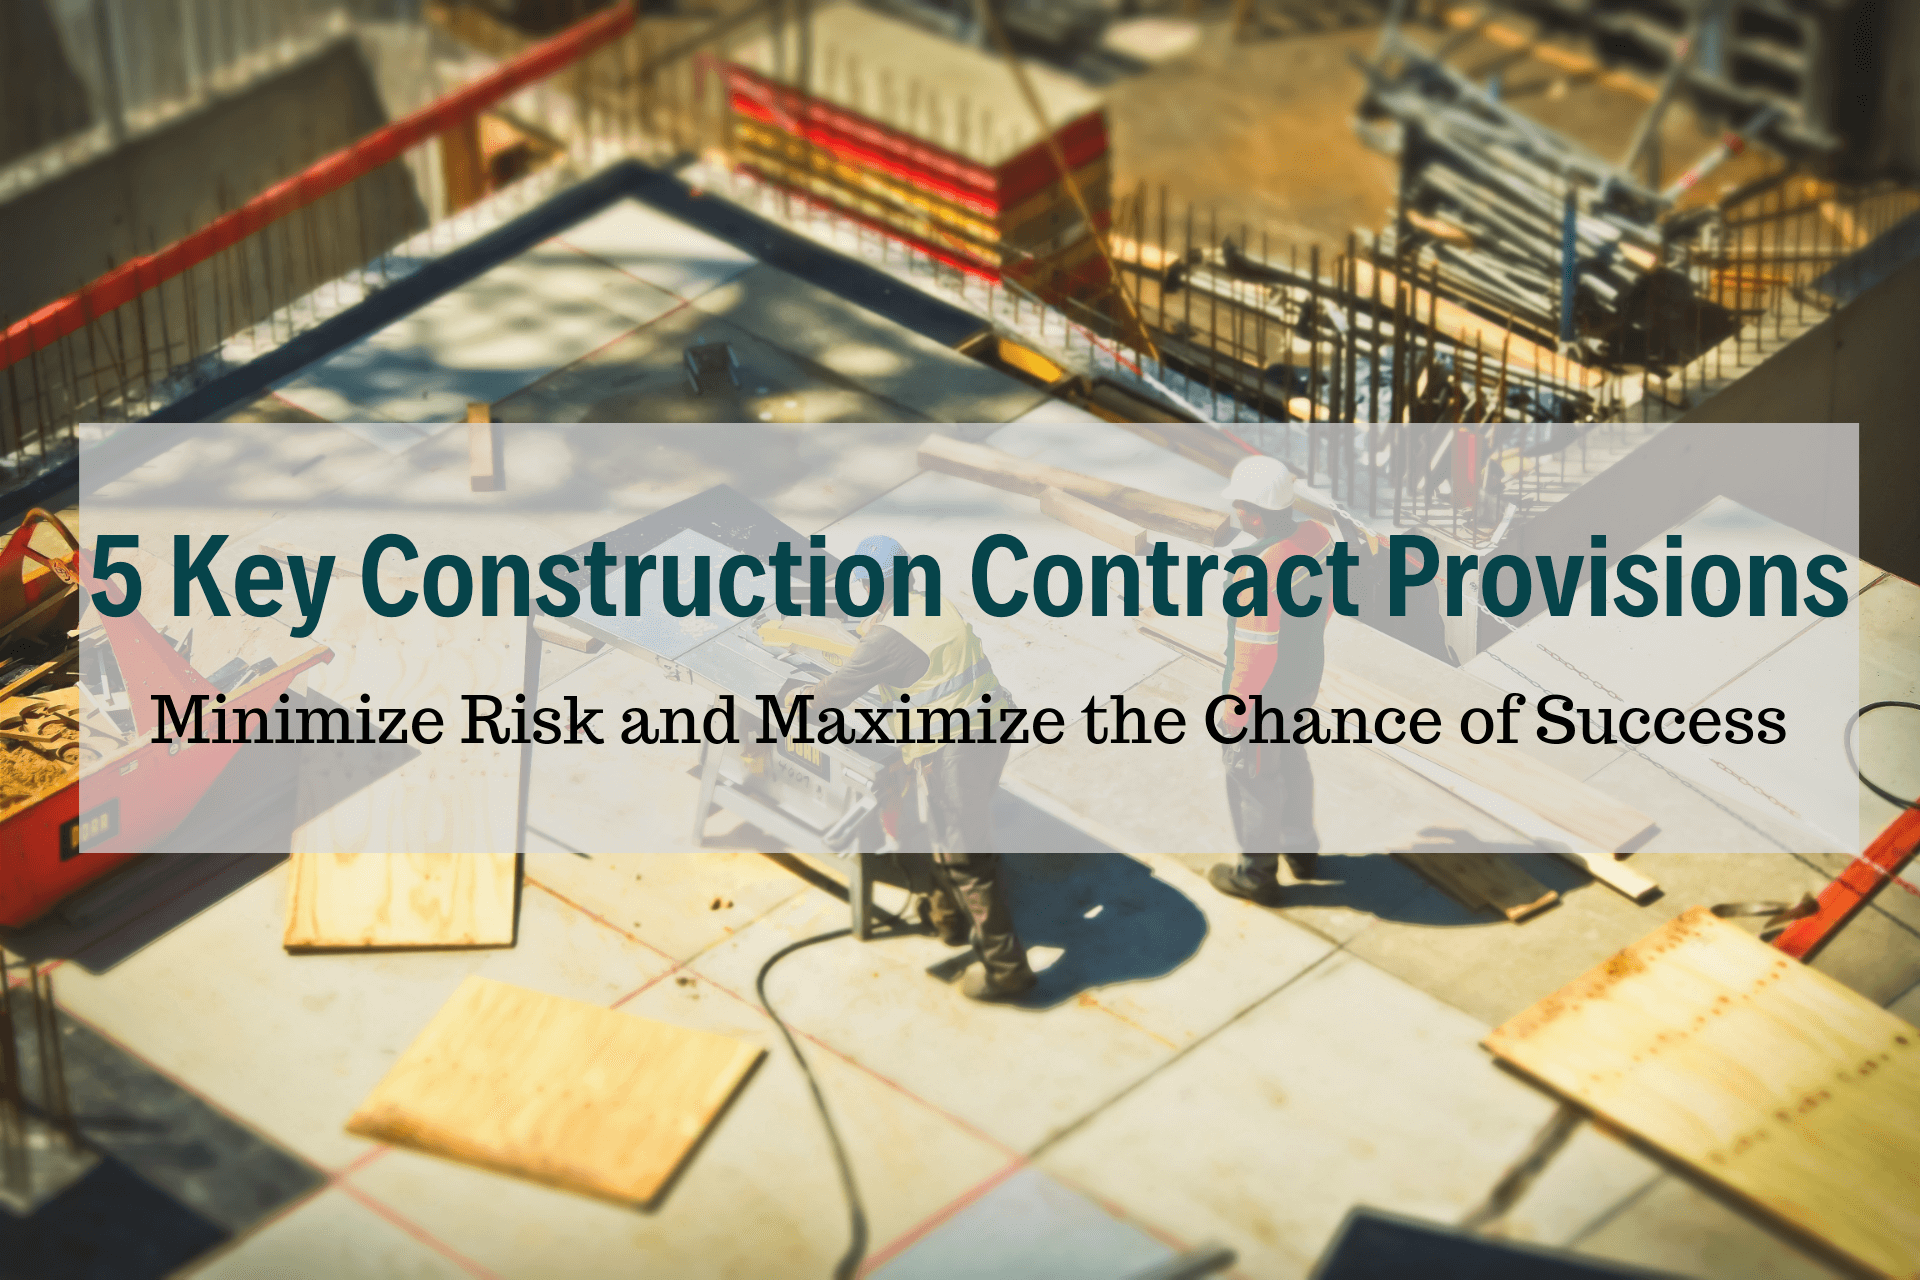 Five Key Construction Contract Provisions for Contractors and Subcontractors